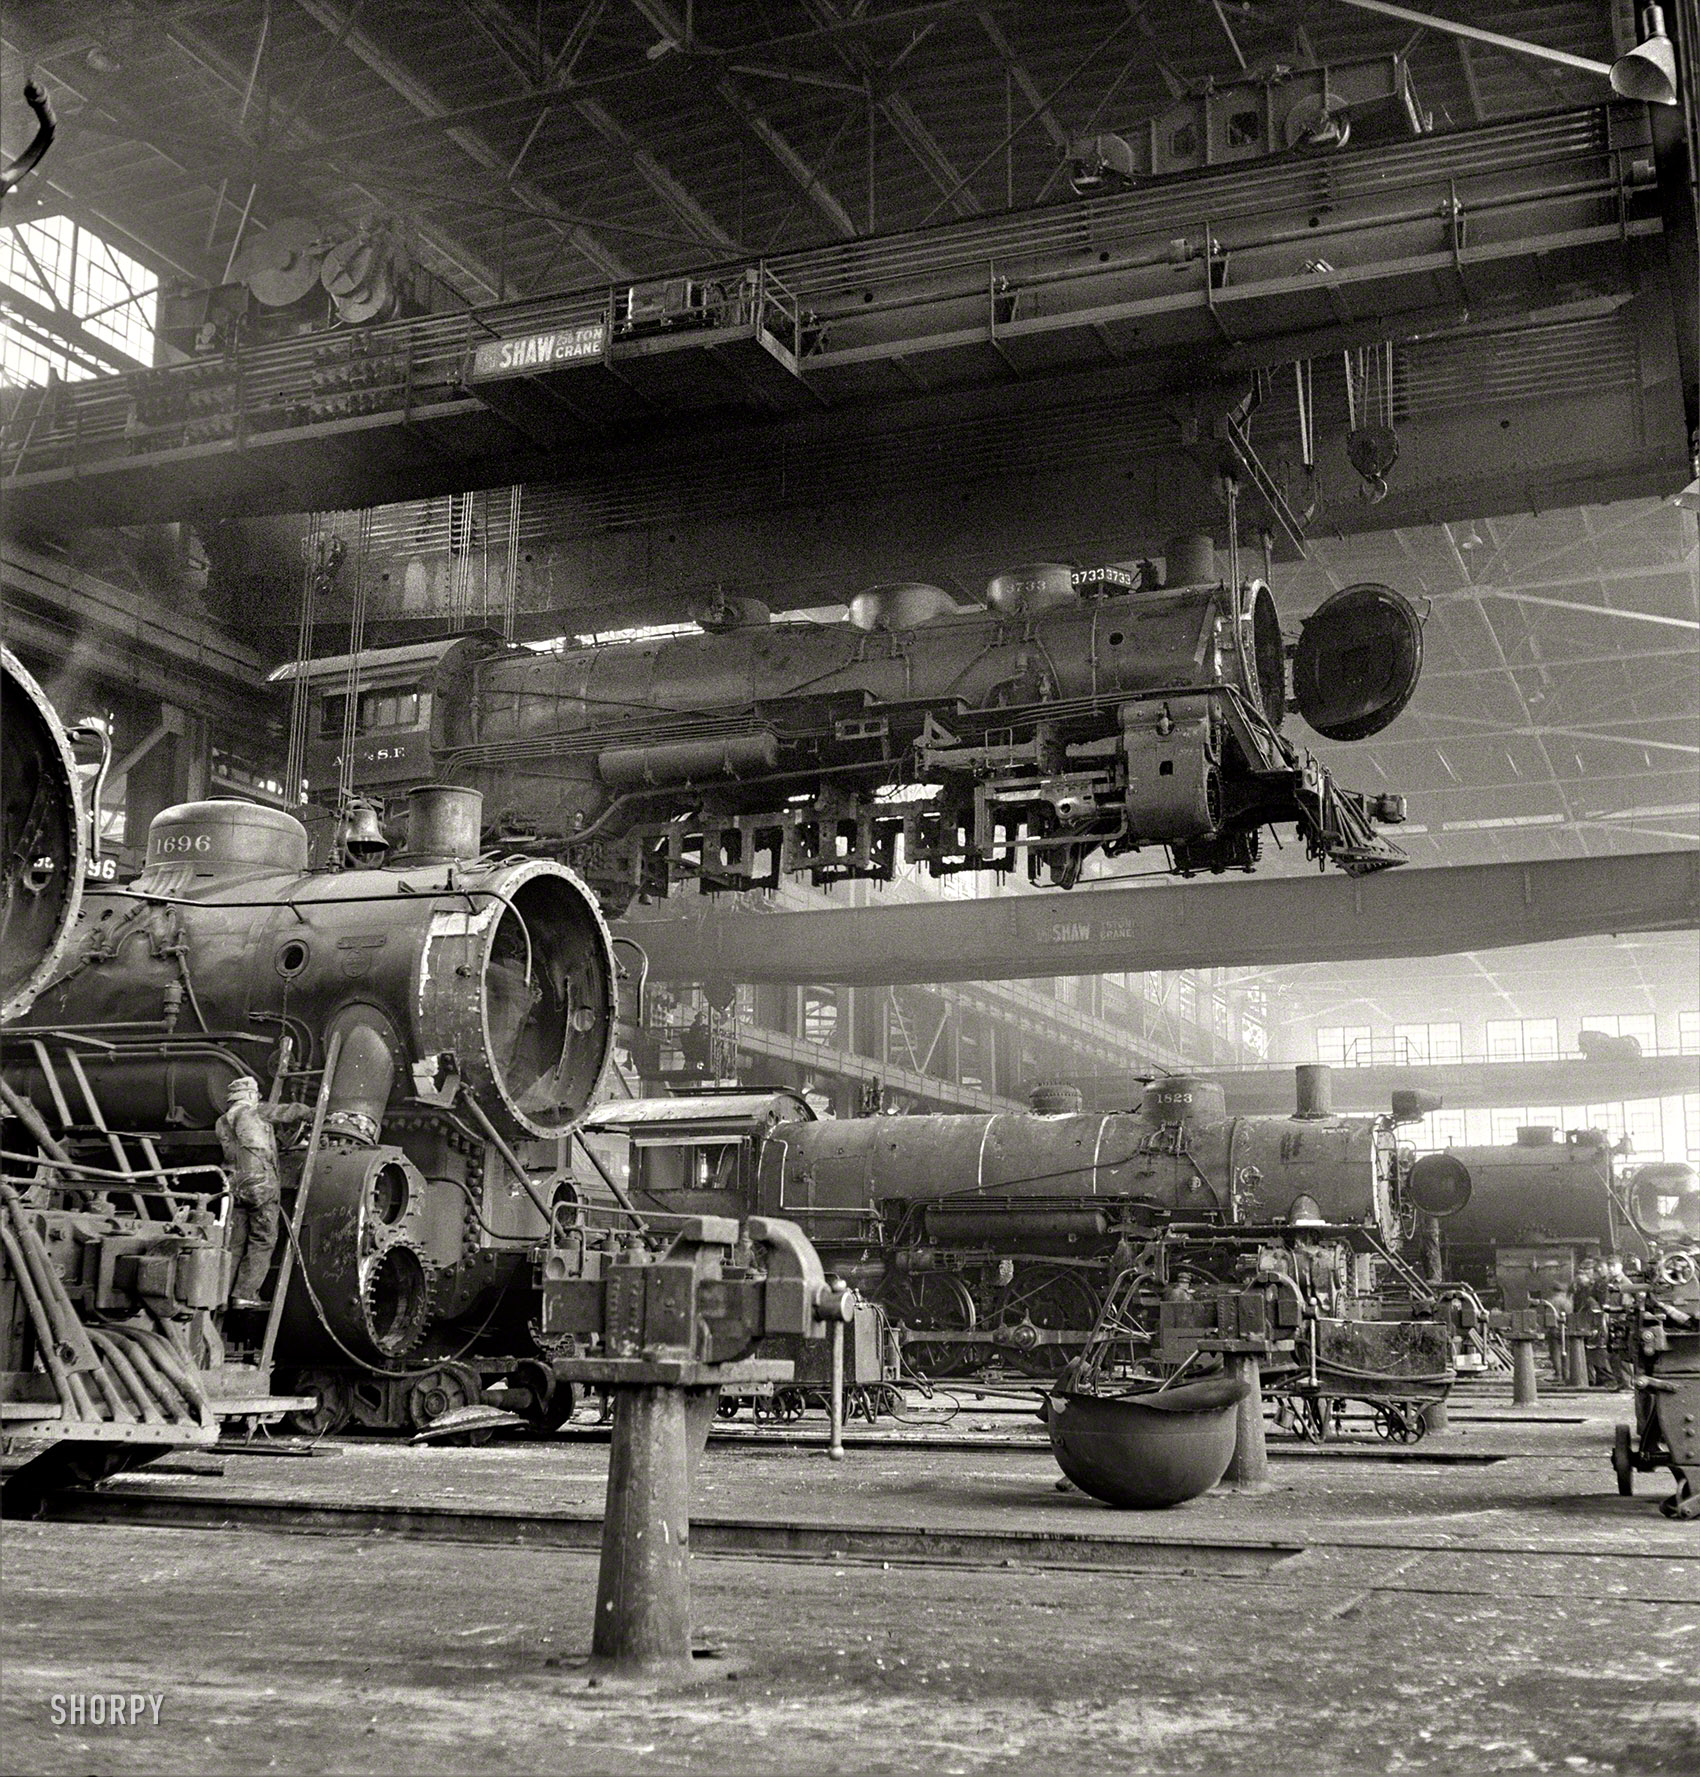 March 1943. Albuquerque, New Mexico. "An engine being carried to another part of the Atchison, Topeka & Santa Fe railroad shops to be wheeled." Photo by Jack Delano for the Office of War Information. View full size.